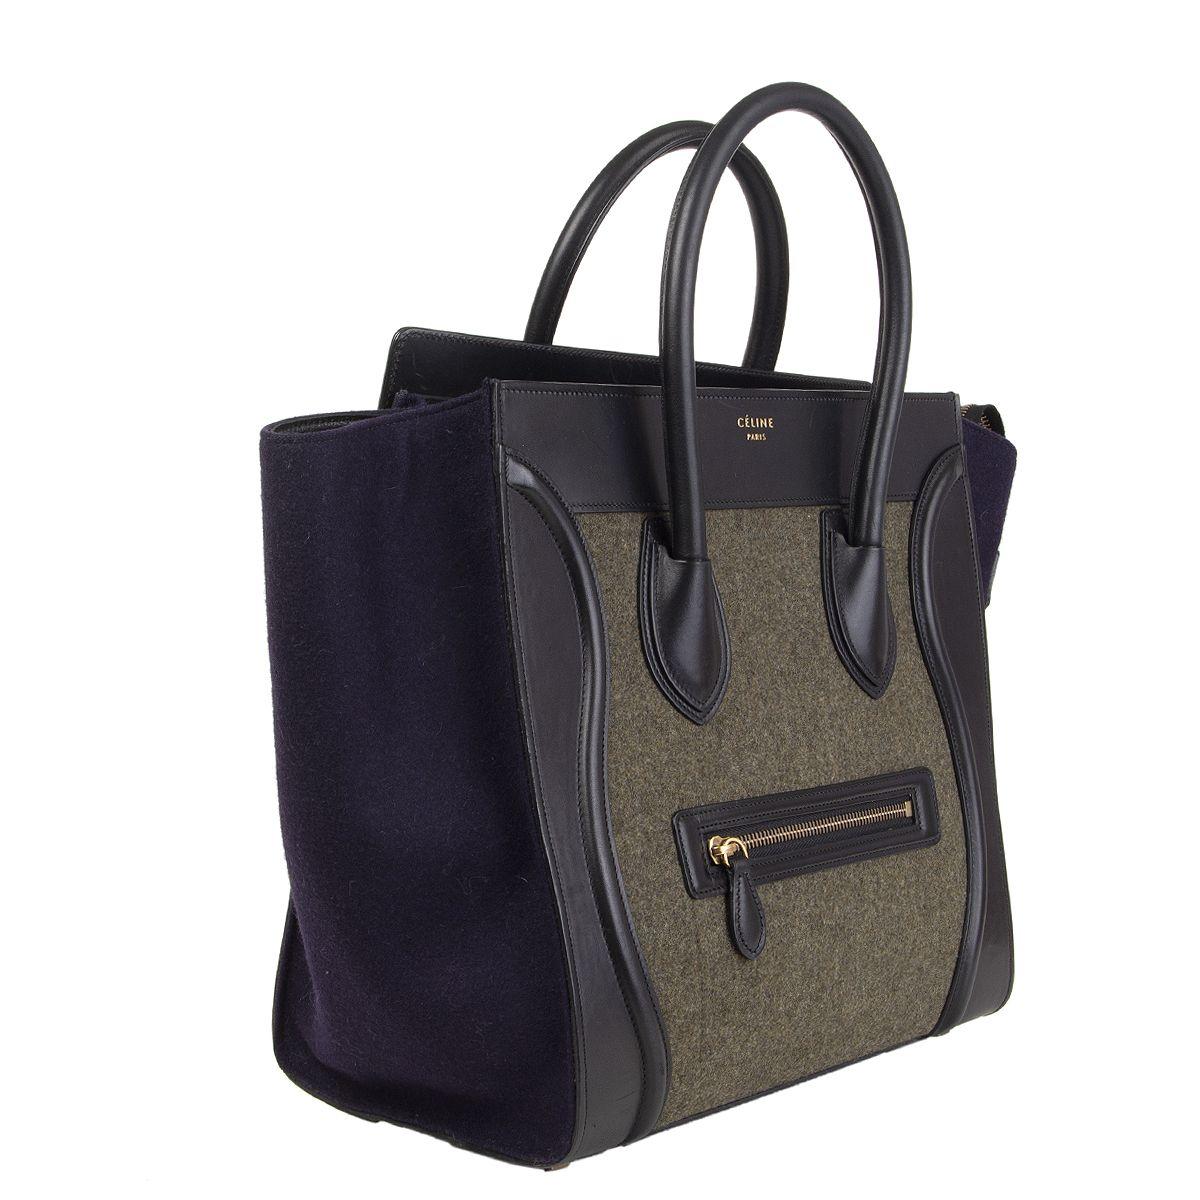 100% authentic Céline 'Mini Luggage' tote in black calfskin and midnight blue and pale olive green felt featuring outer zipper pocket on the front. Lined in black calfskin with one zipper pocket against the back and two open pockets against the